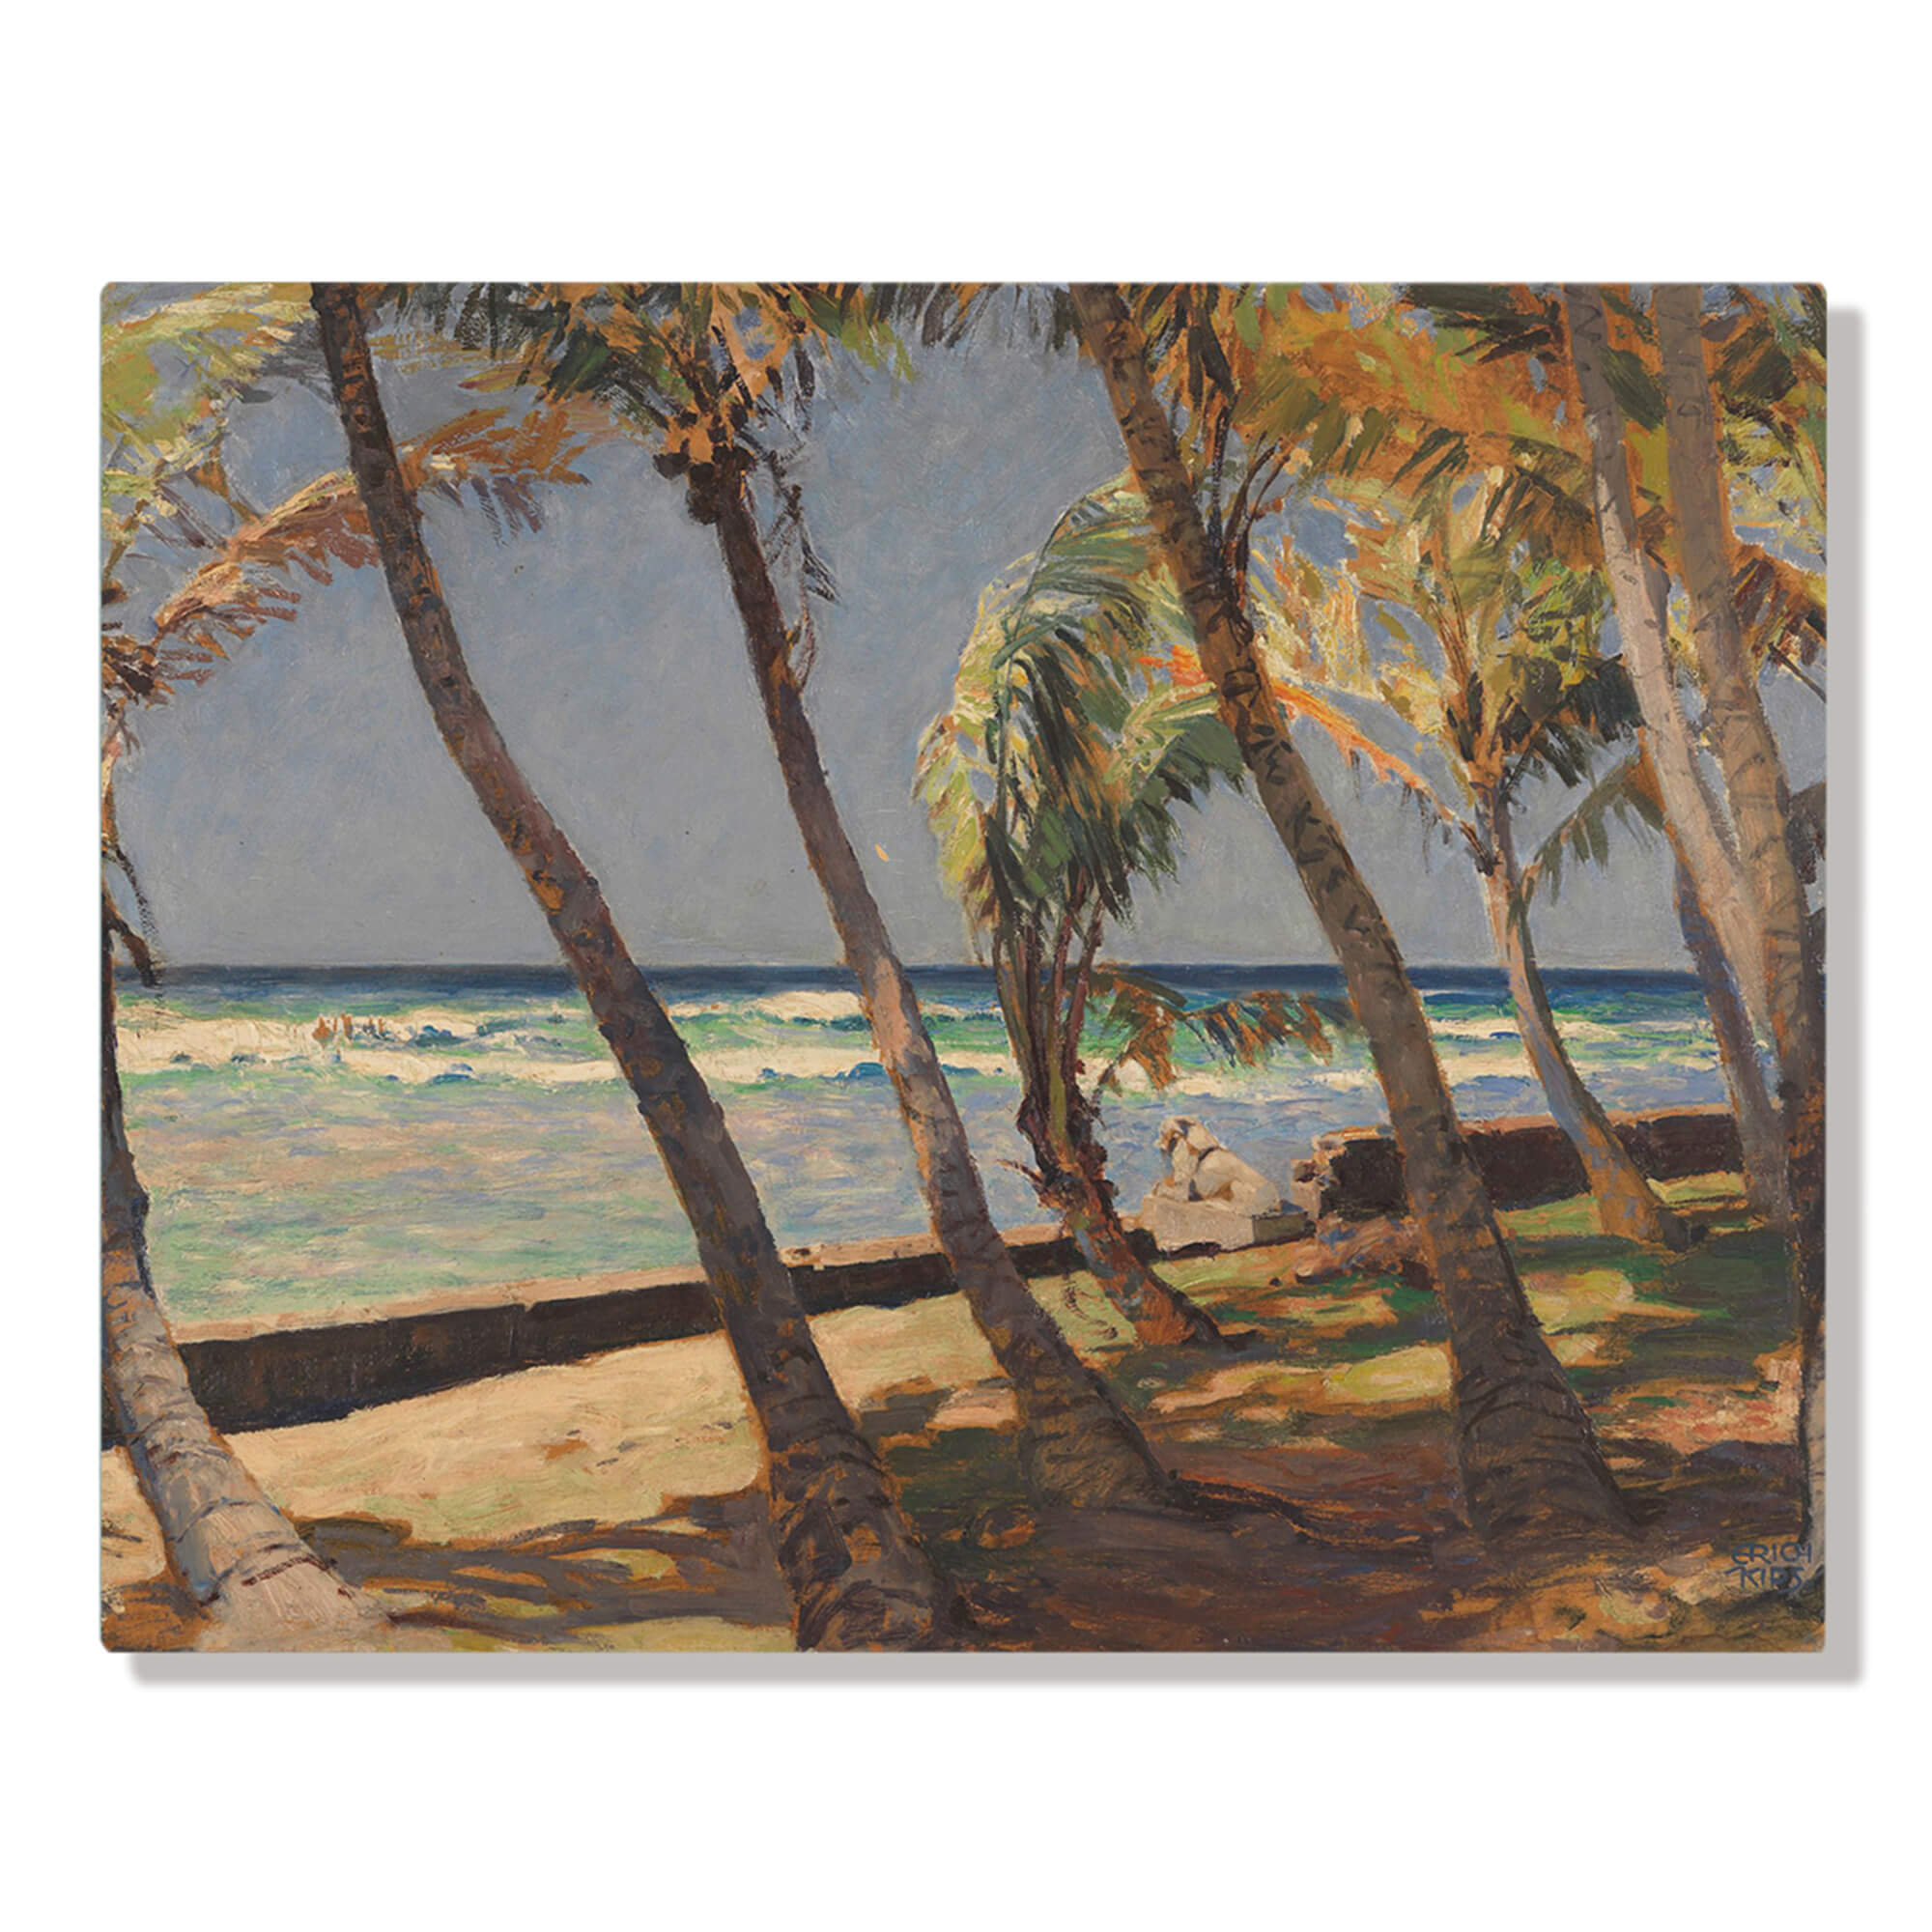 A vintage artwork featuring a beach with large crashing waves and come coconut trees